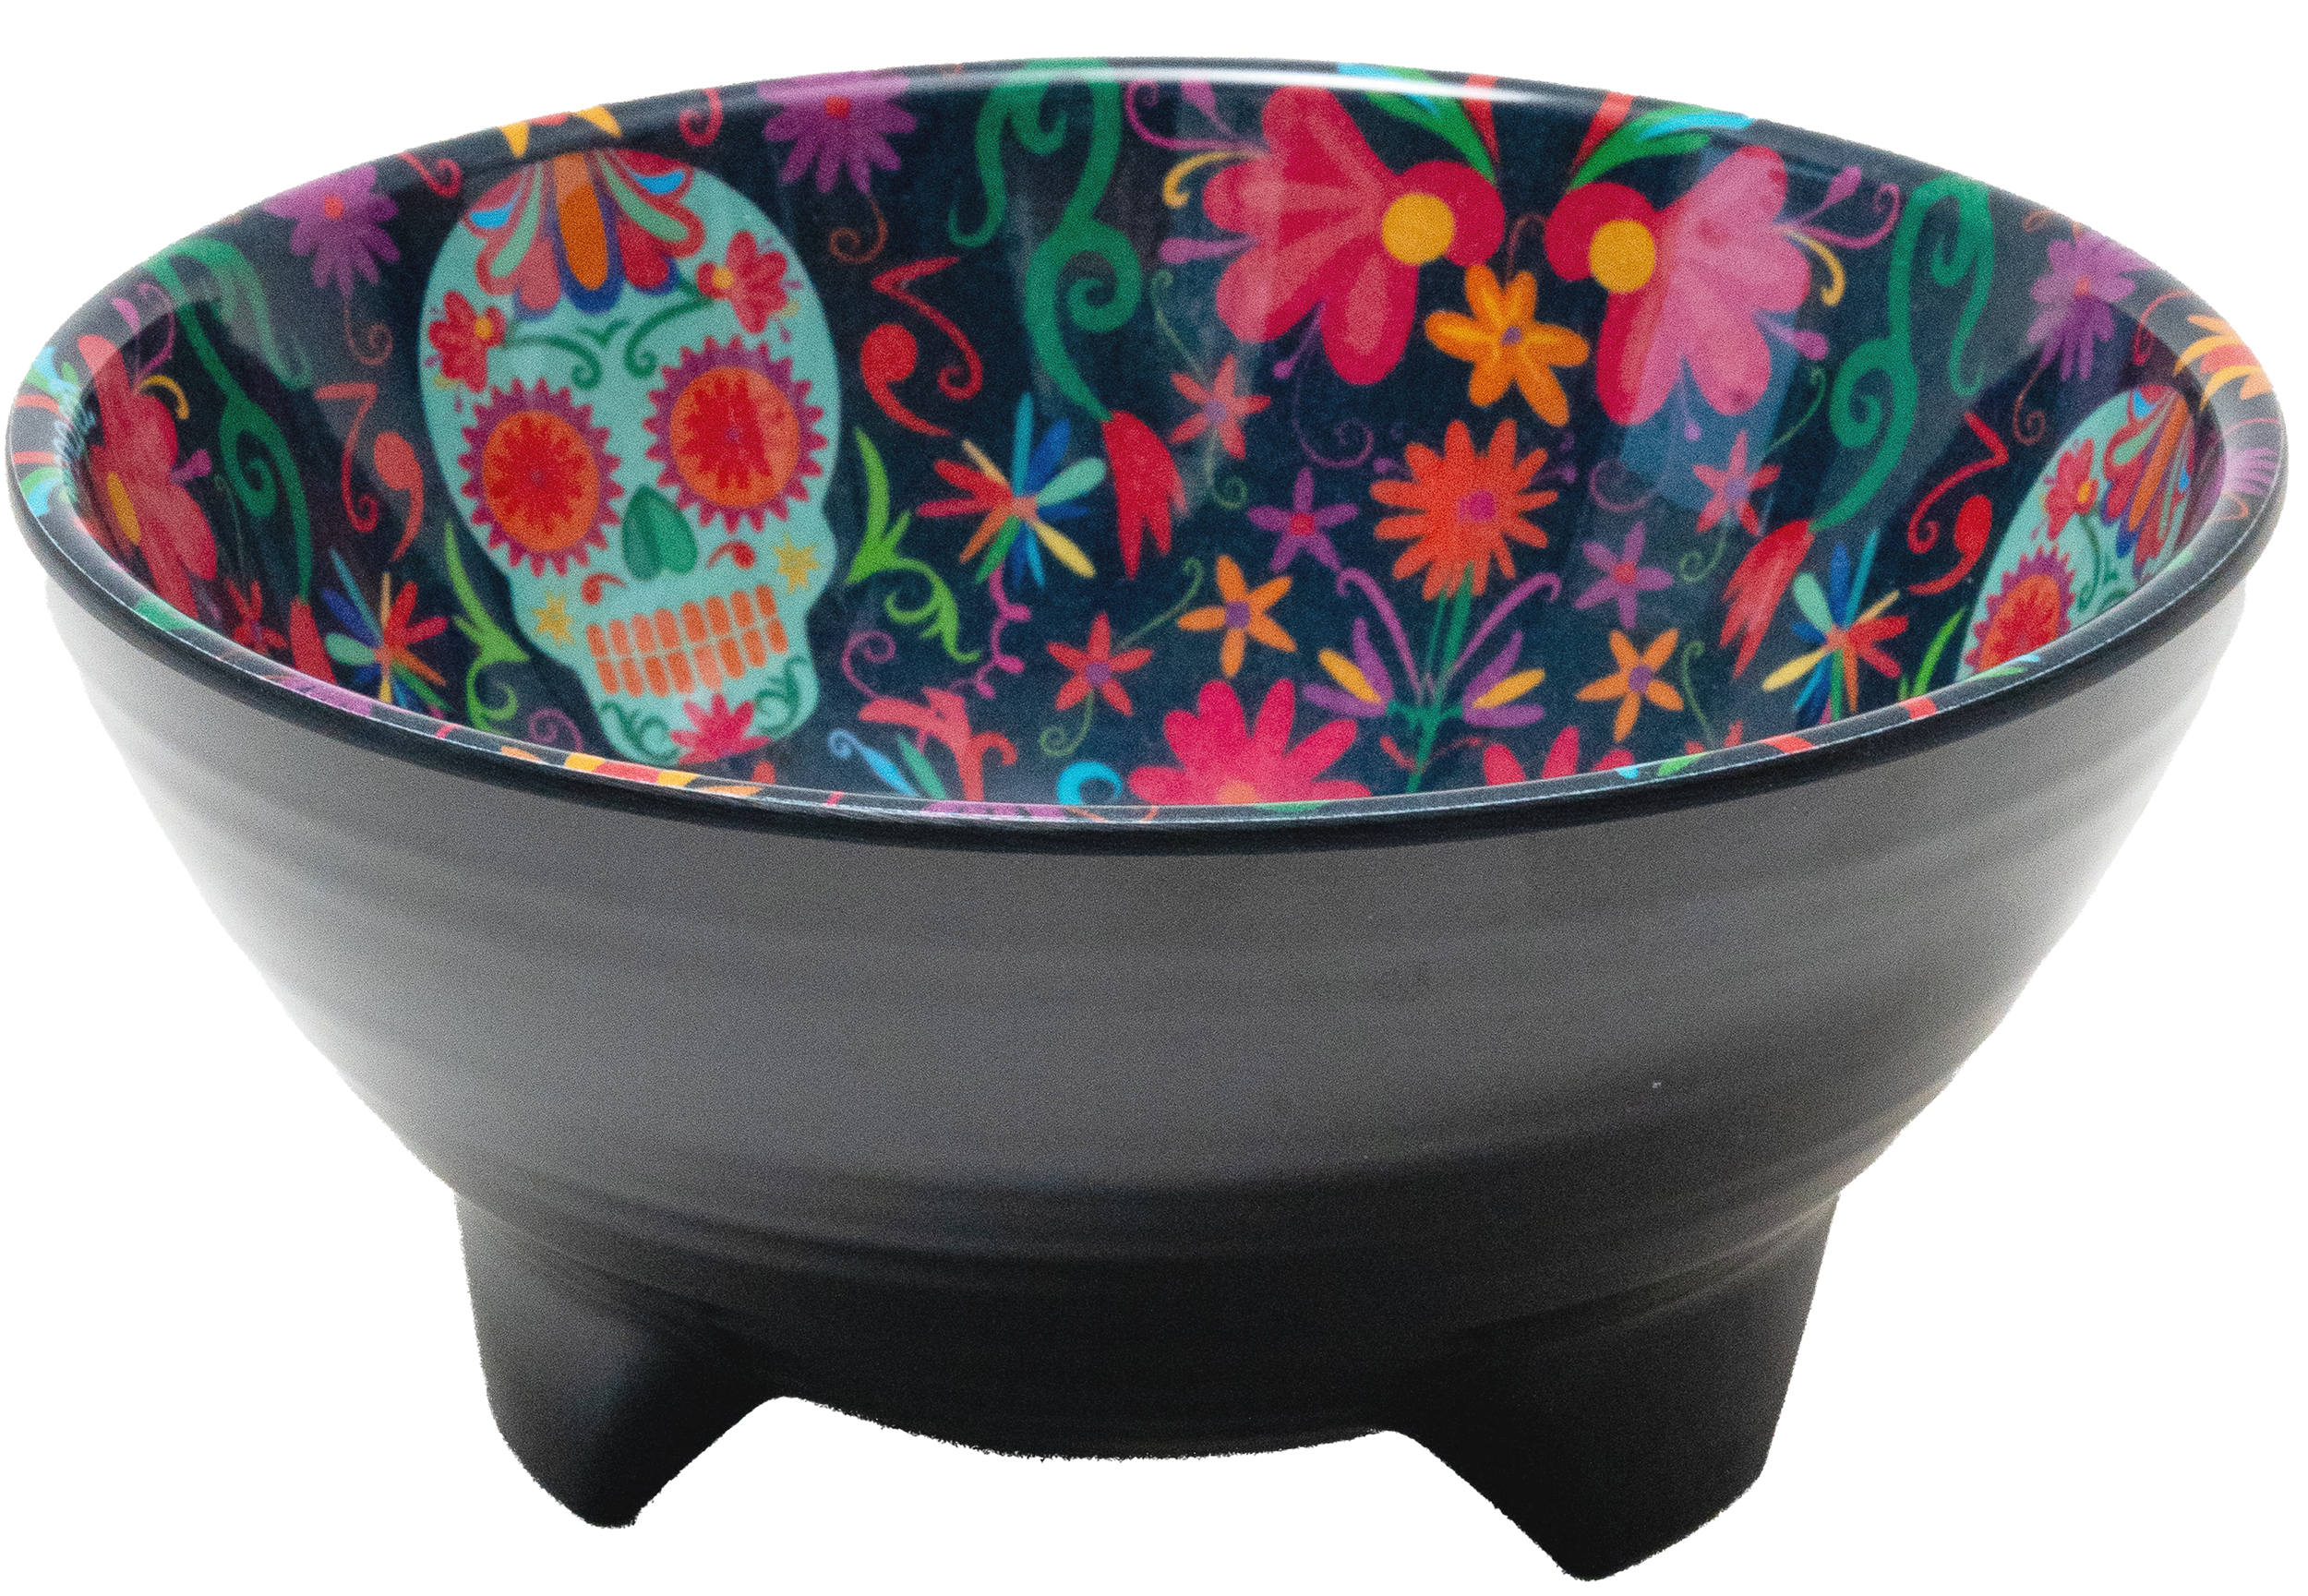 TACO PARTY BOWL｜DAY OF THE DEAD EDITION